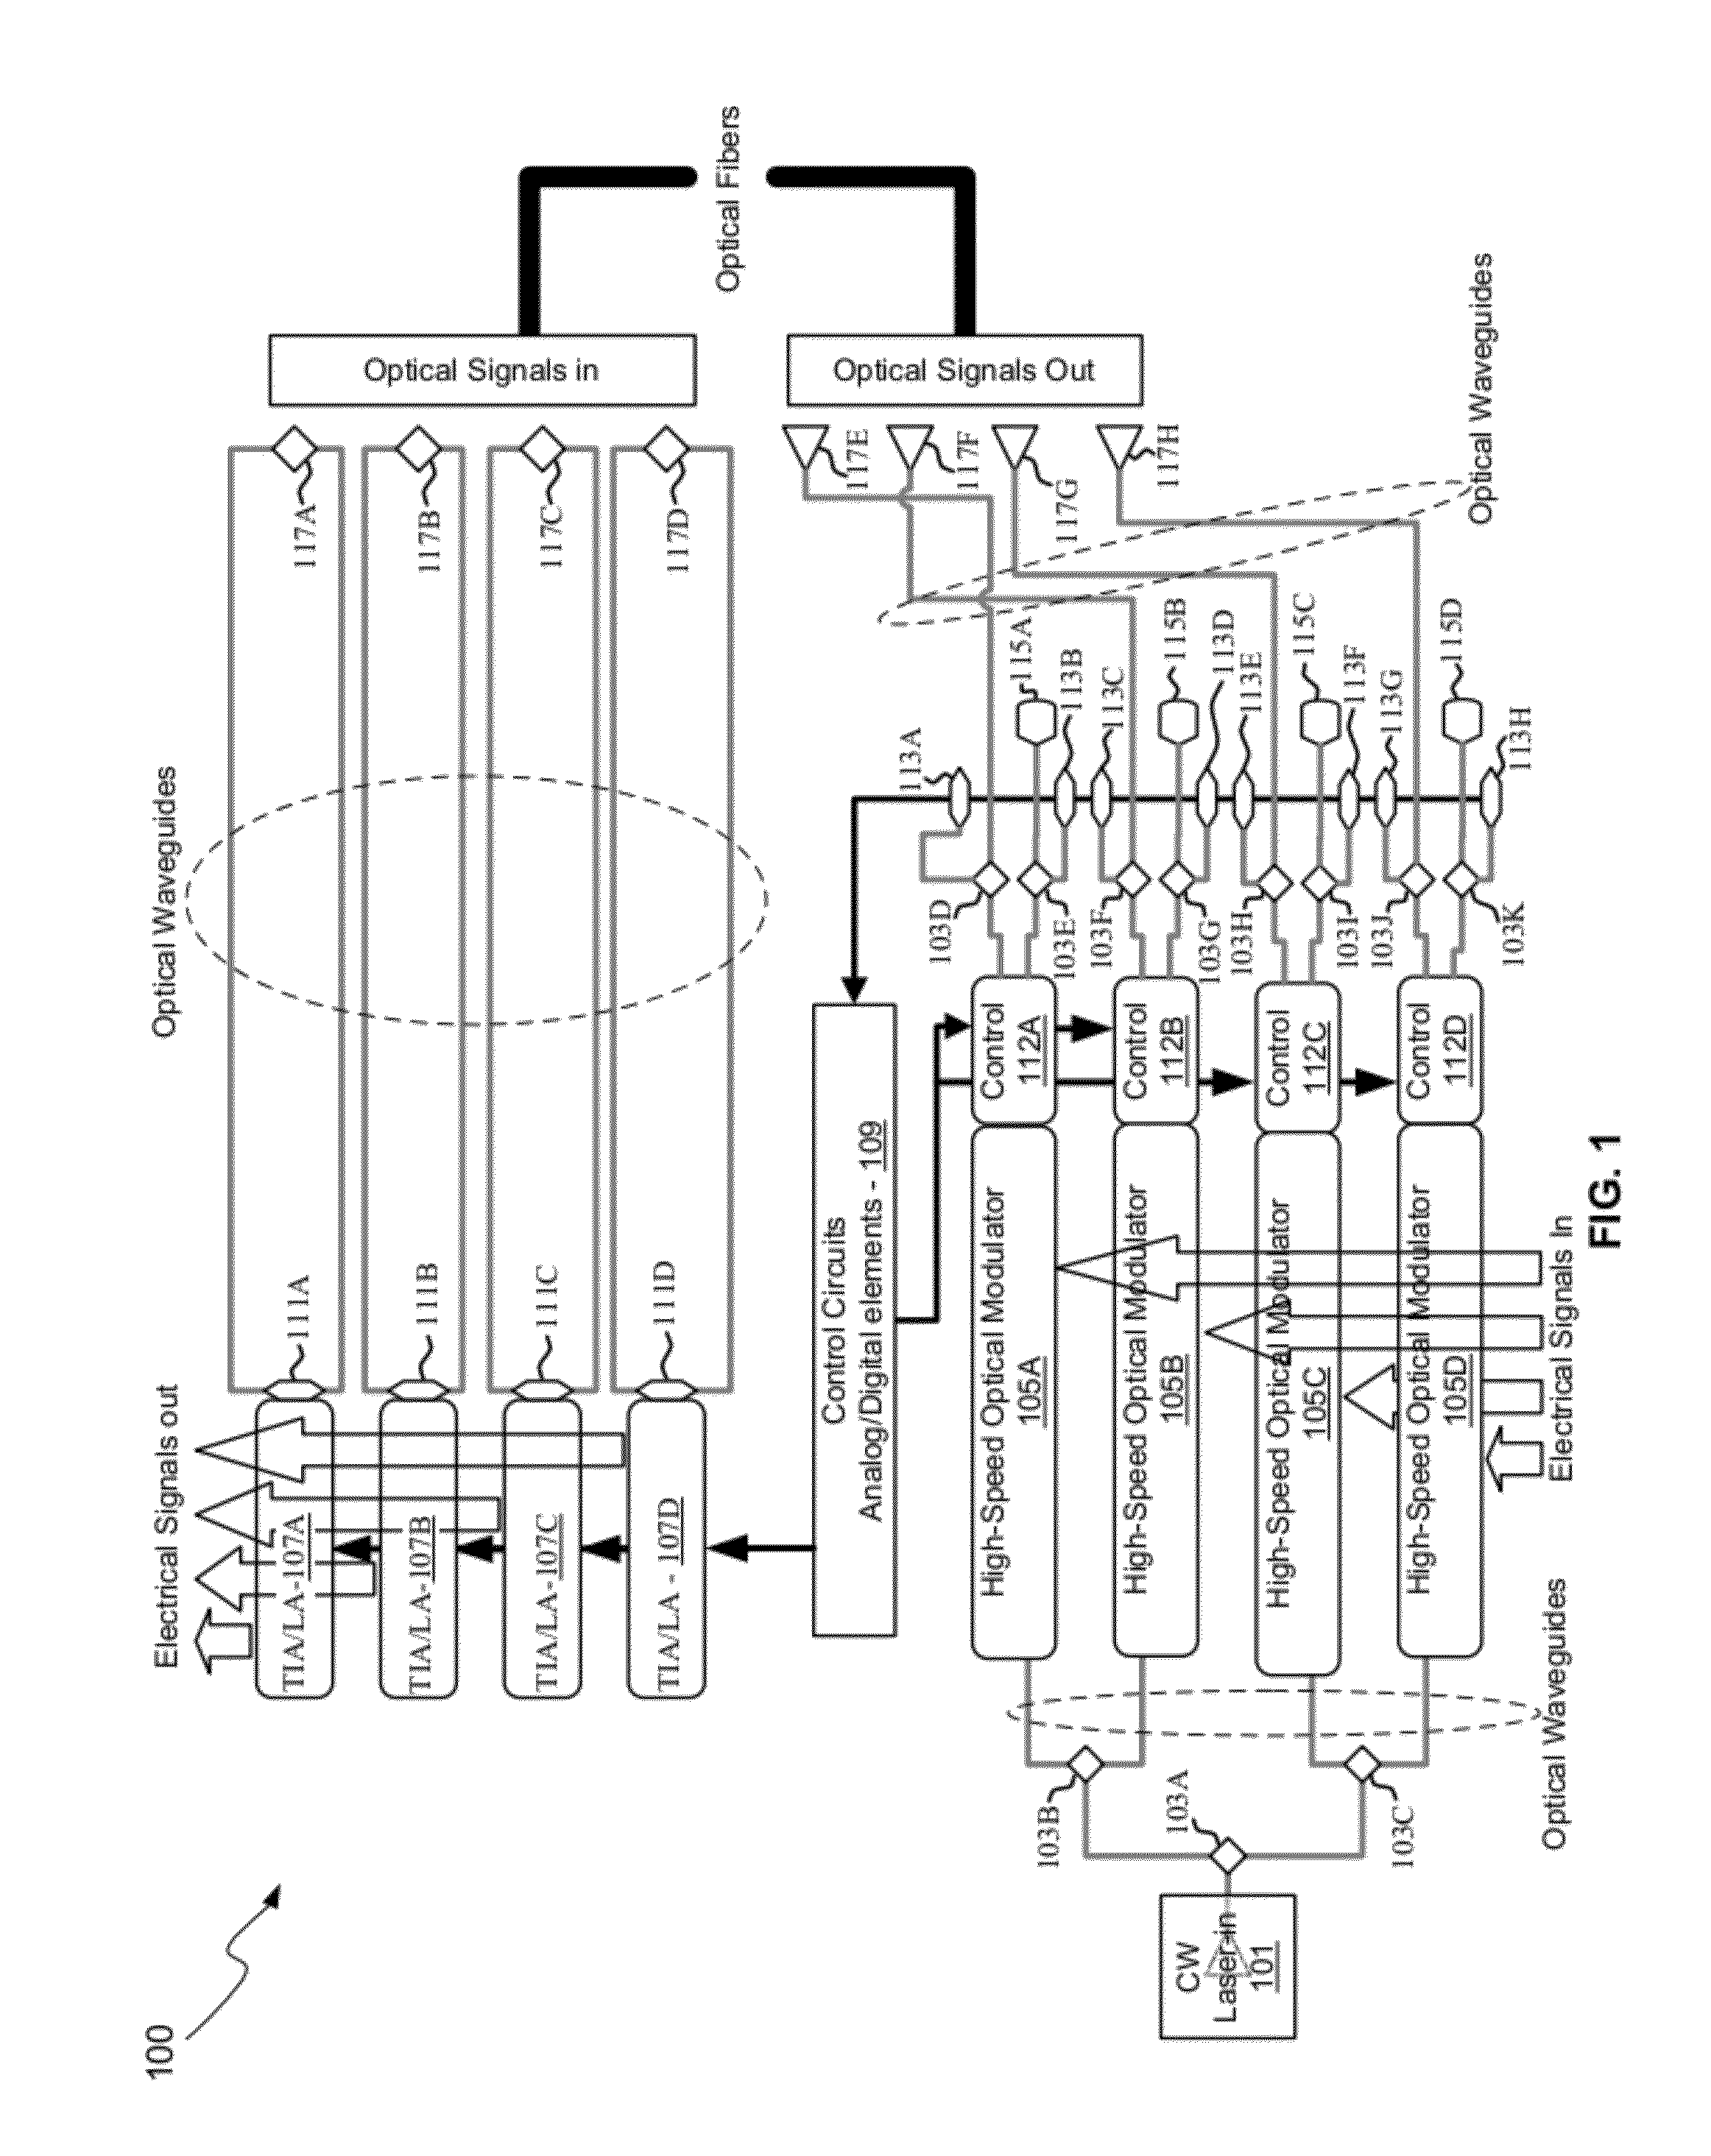 Method And System For A Photonic Interposer